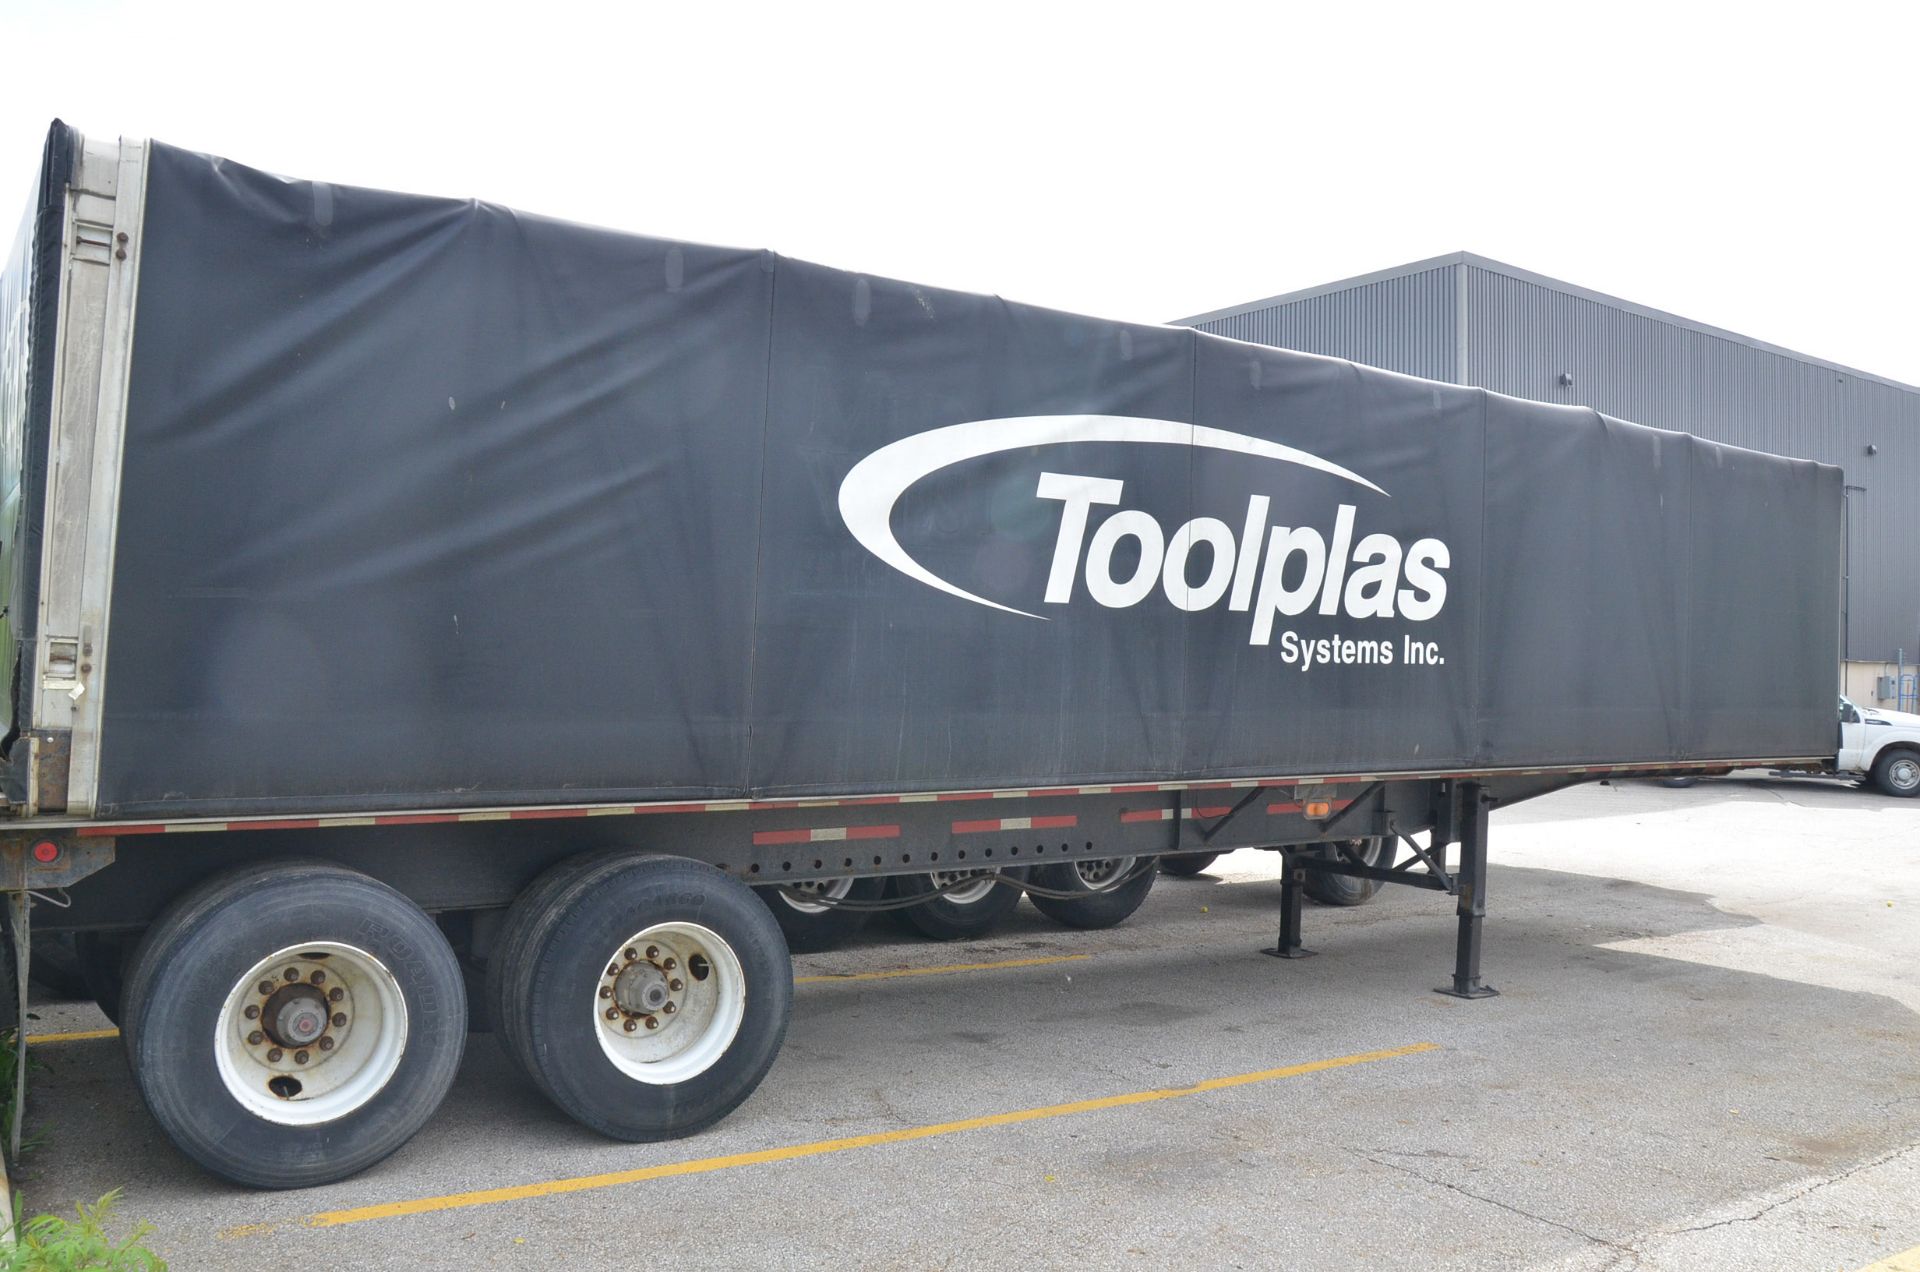 TRAILERMOBILE F71T-6RAG TANDEM AXLE 45' FLAT BED TRAILER WITH ROLLING TARP, VIN: 1PTF7ATAXR9014778 - Image 6 of 6